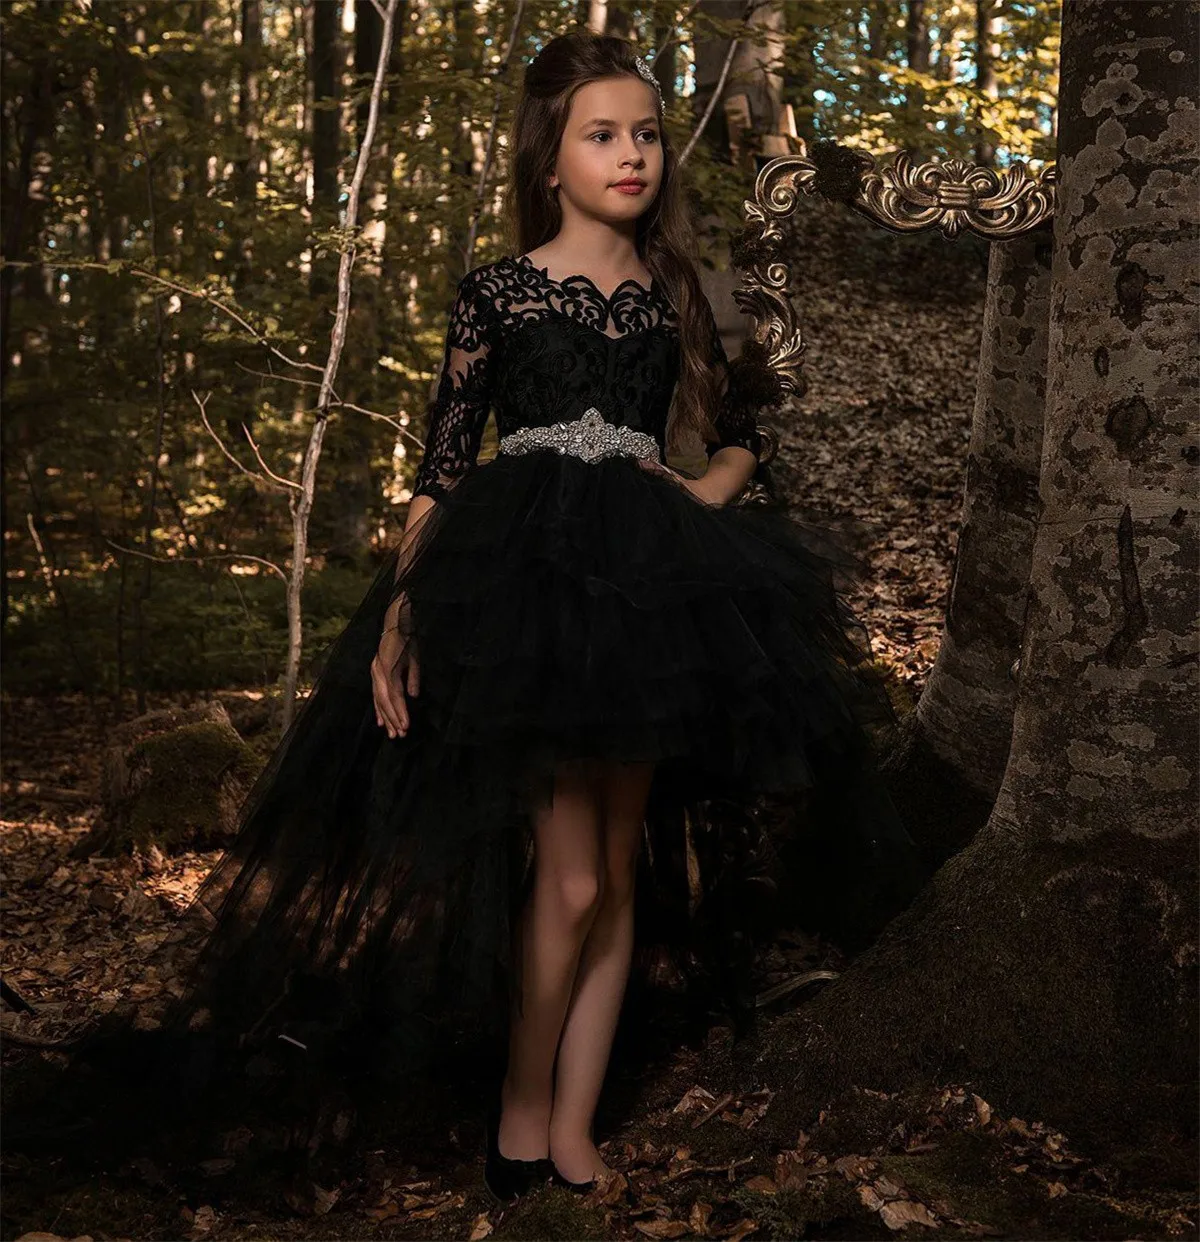 

Black Long Sleeve Flower Girl Dresses For Wedding Crystal Sash Beaded Lace Appliques Pageant Gowns For Girls Kids Formal Wear